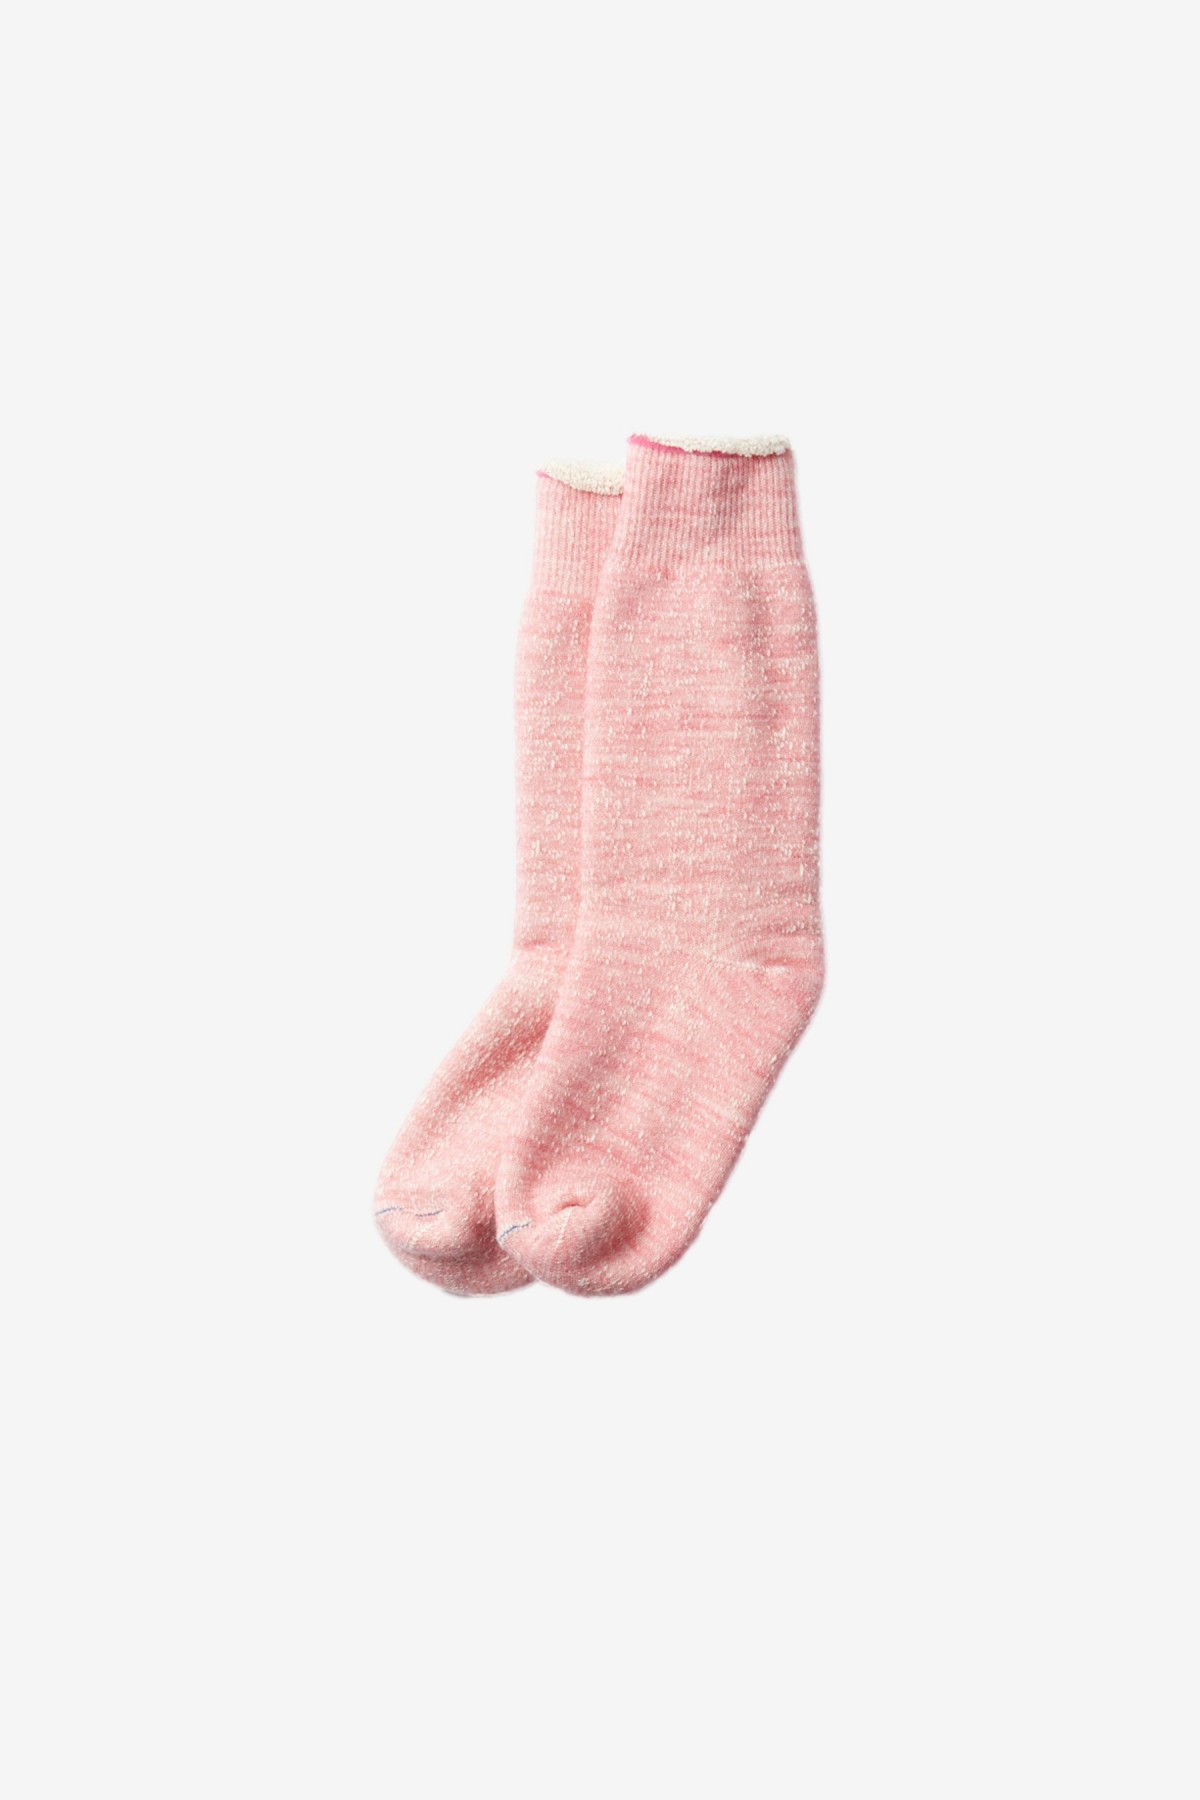 RoToTo Double Face Socks in Light Pink